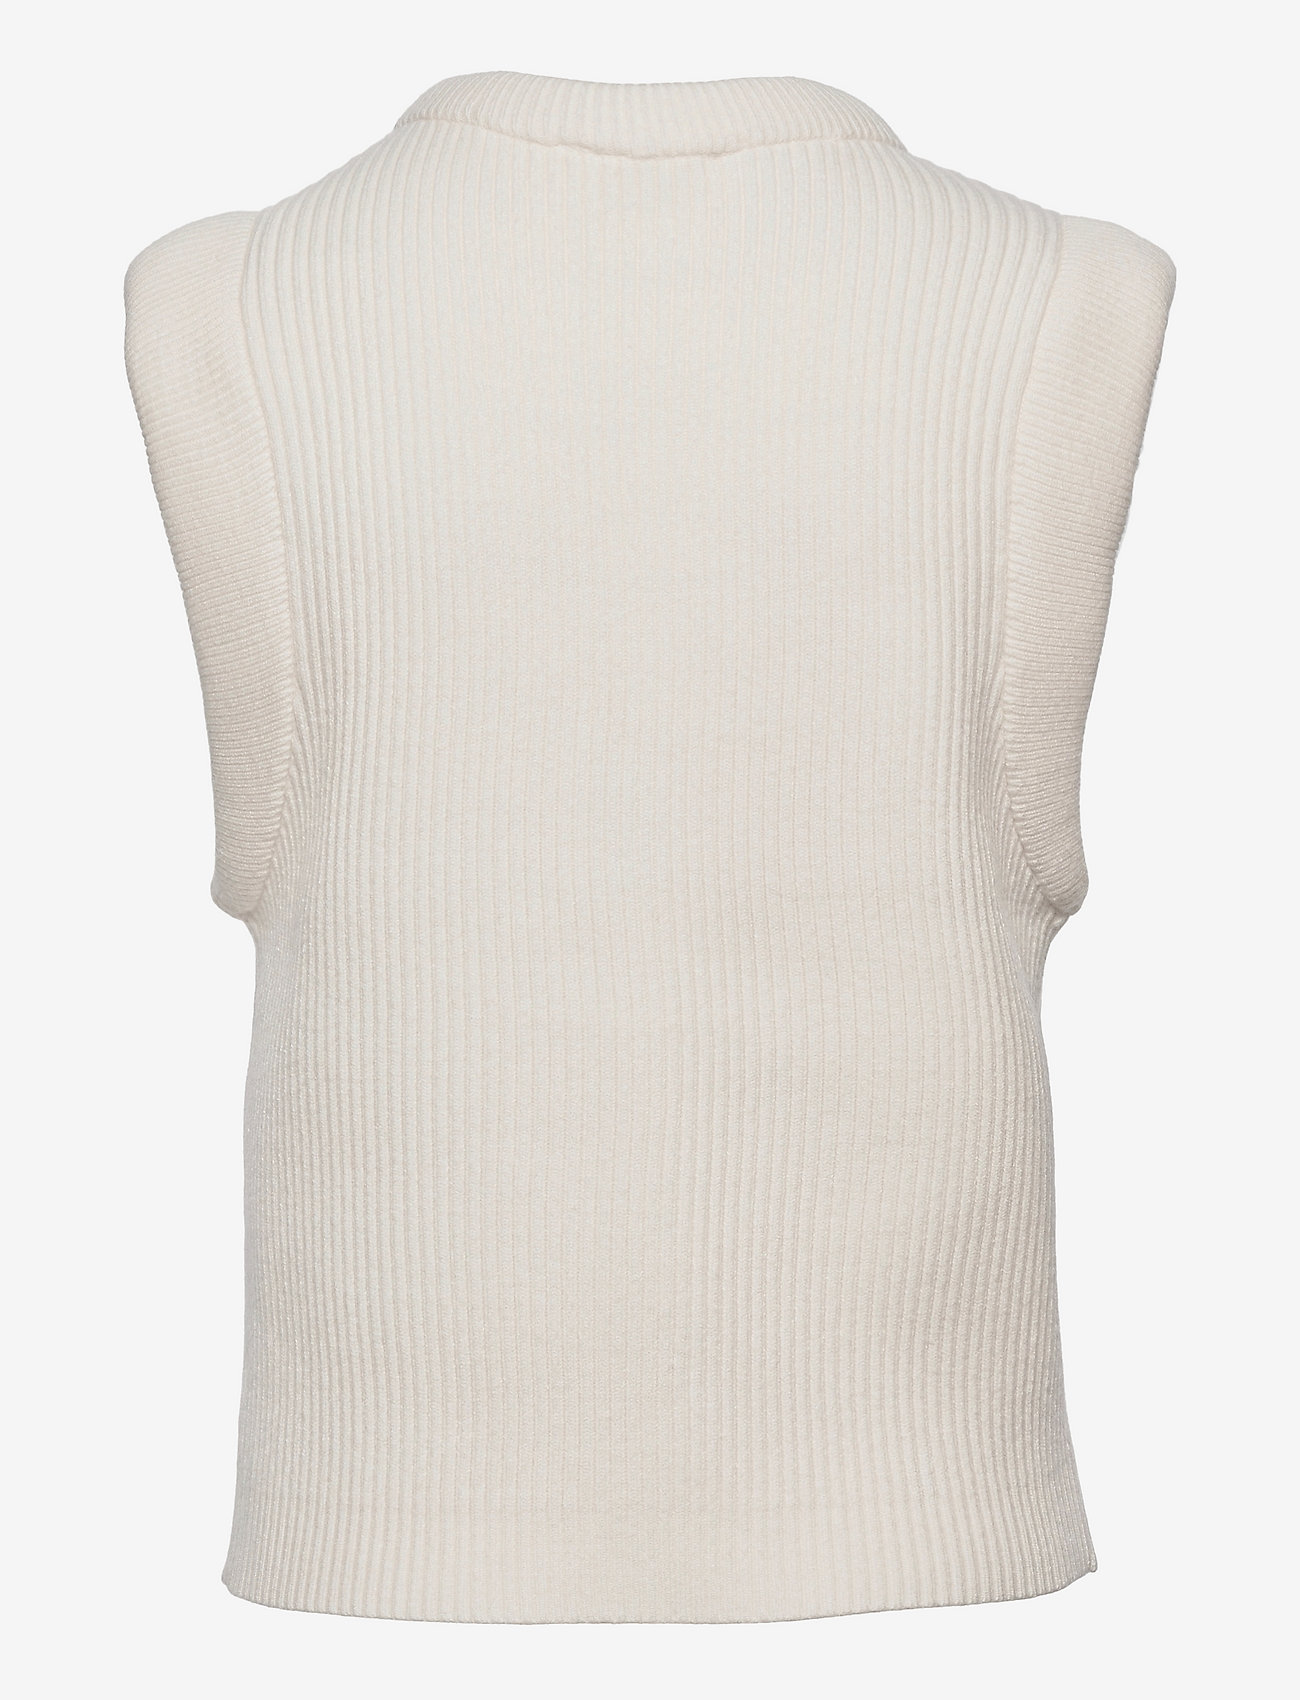 Notes du Nord - Vibe Top - knitted vests - cream - 1